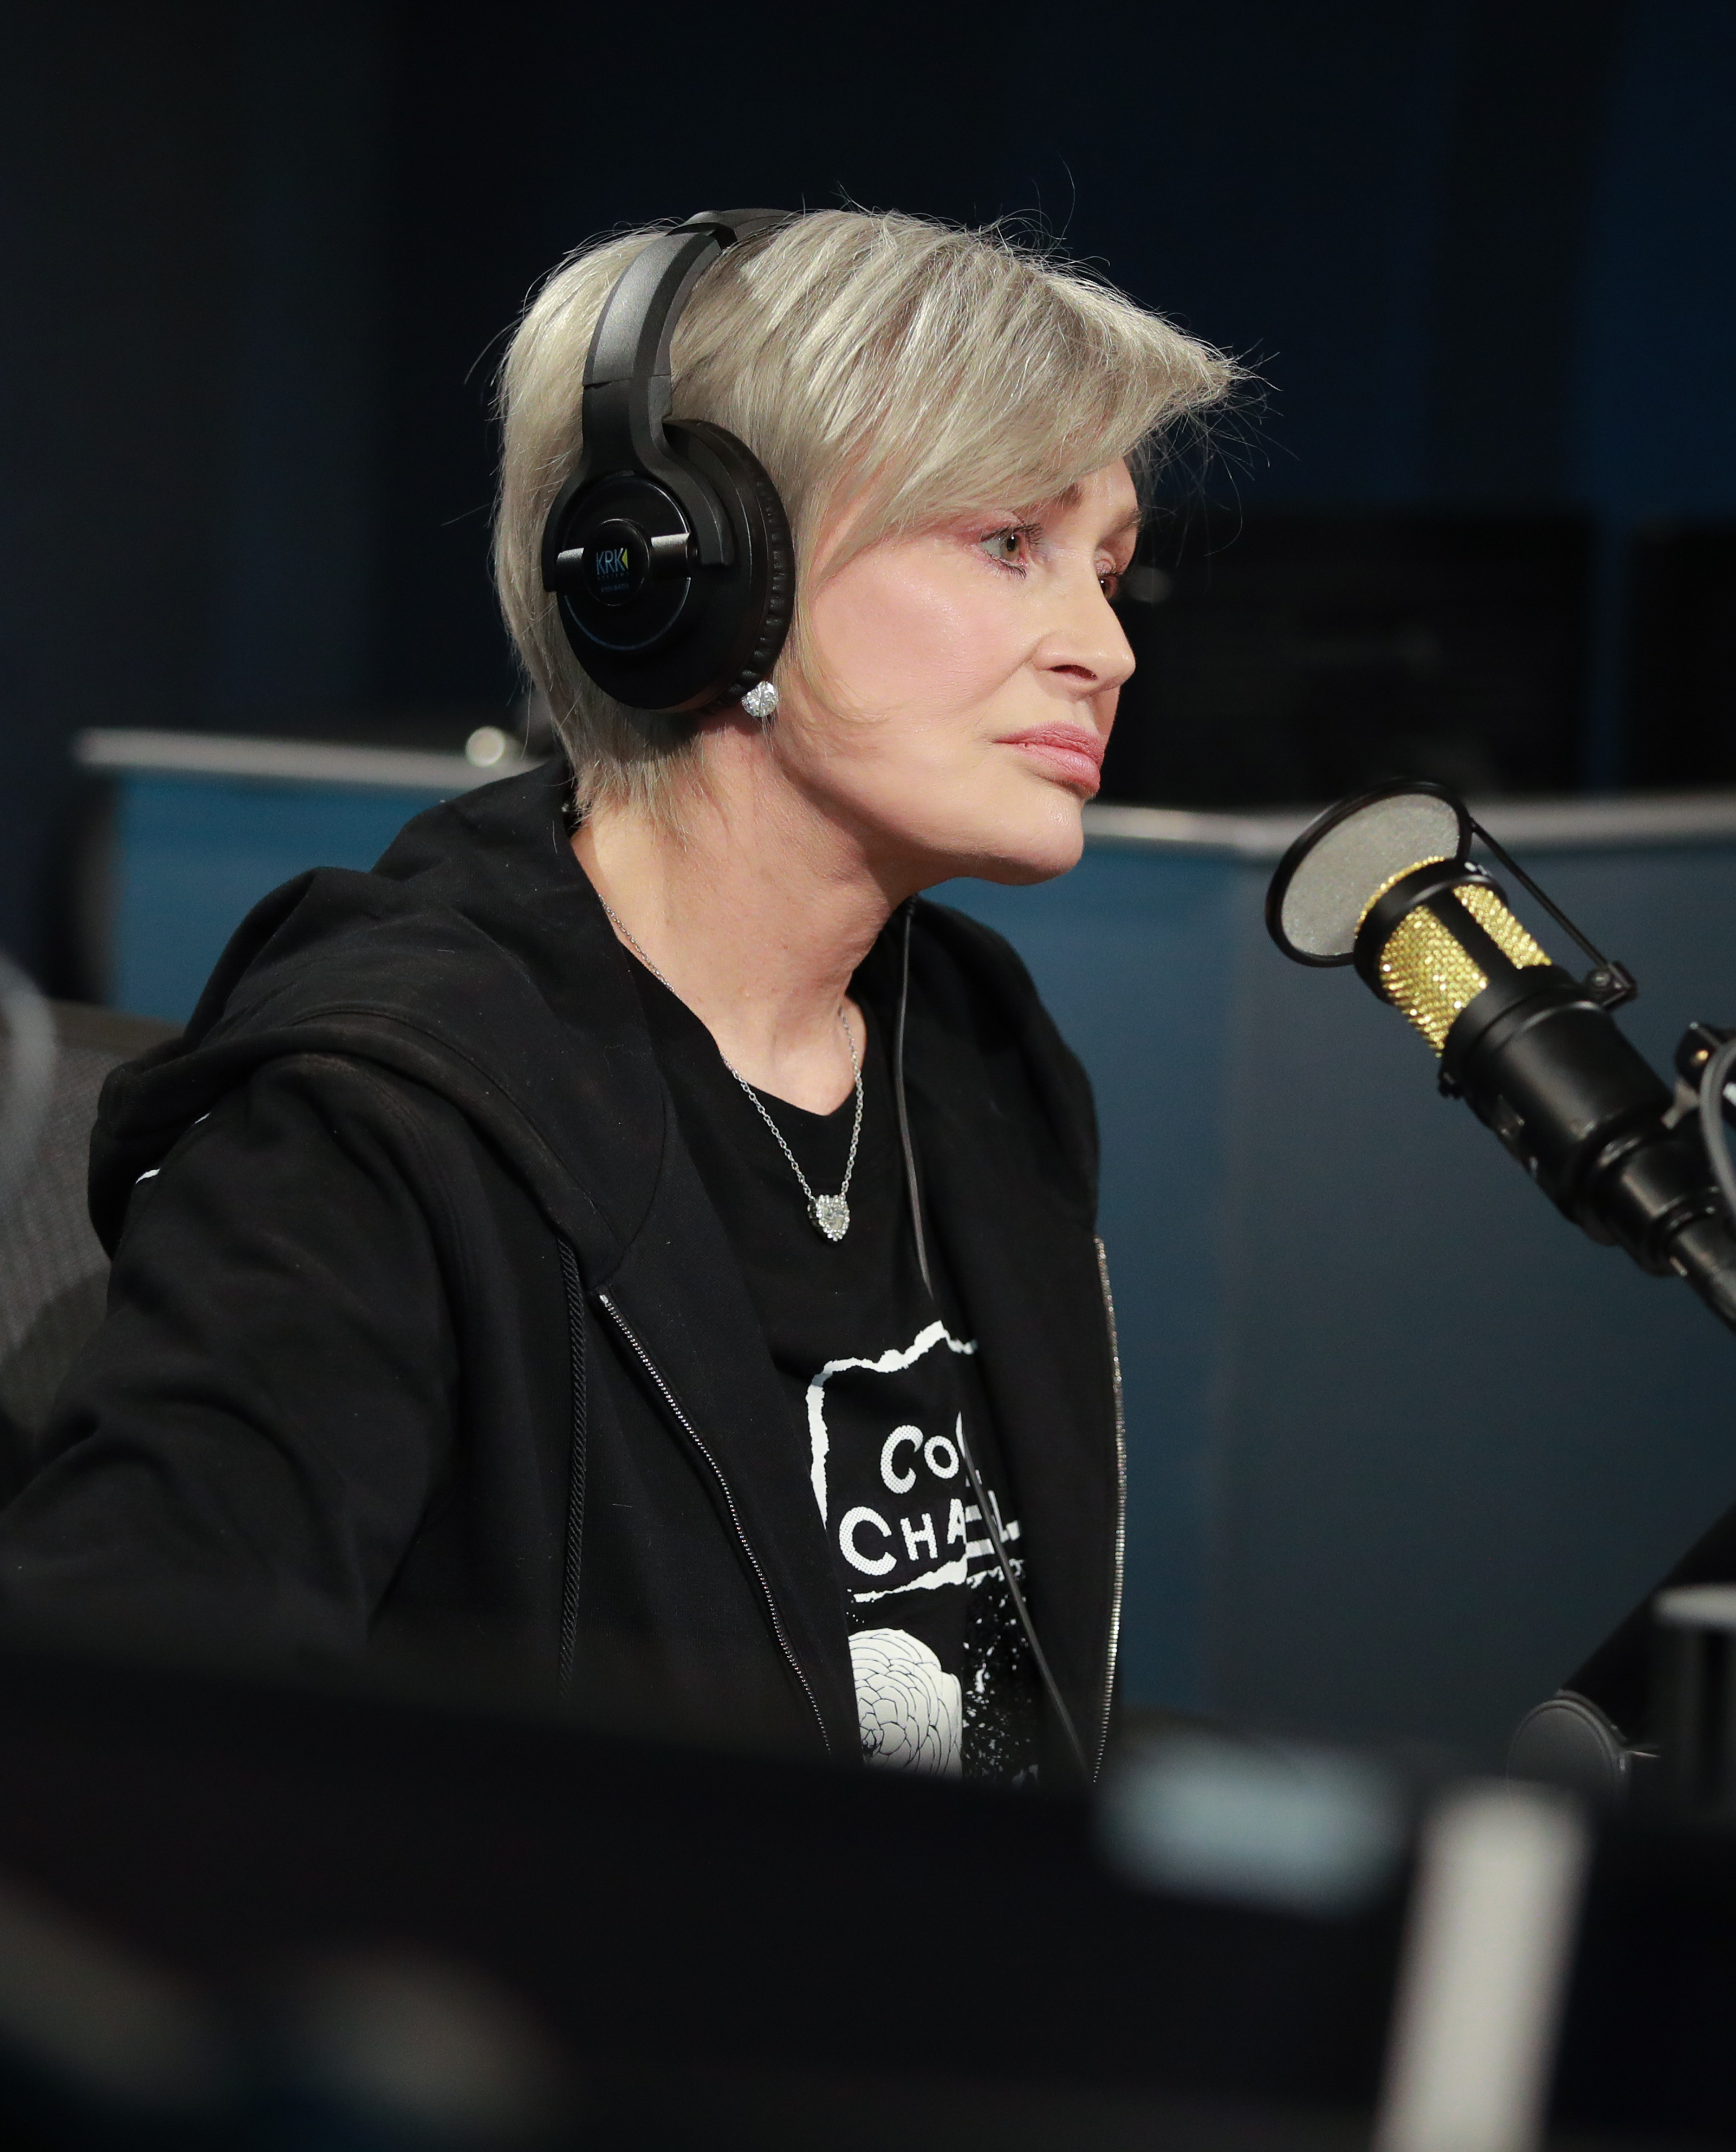 Sharon sitting in front of a mic during an interview